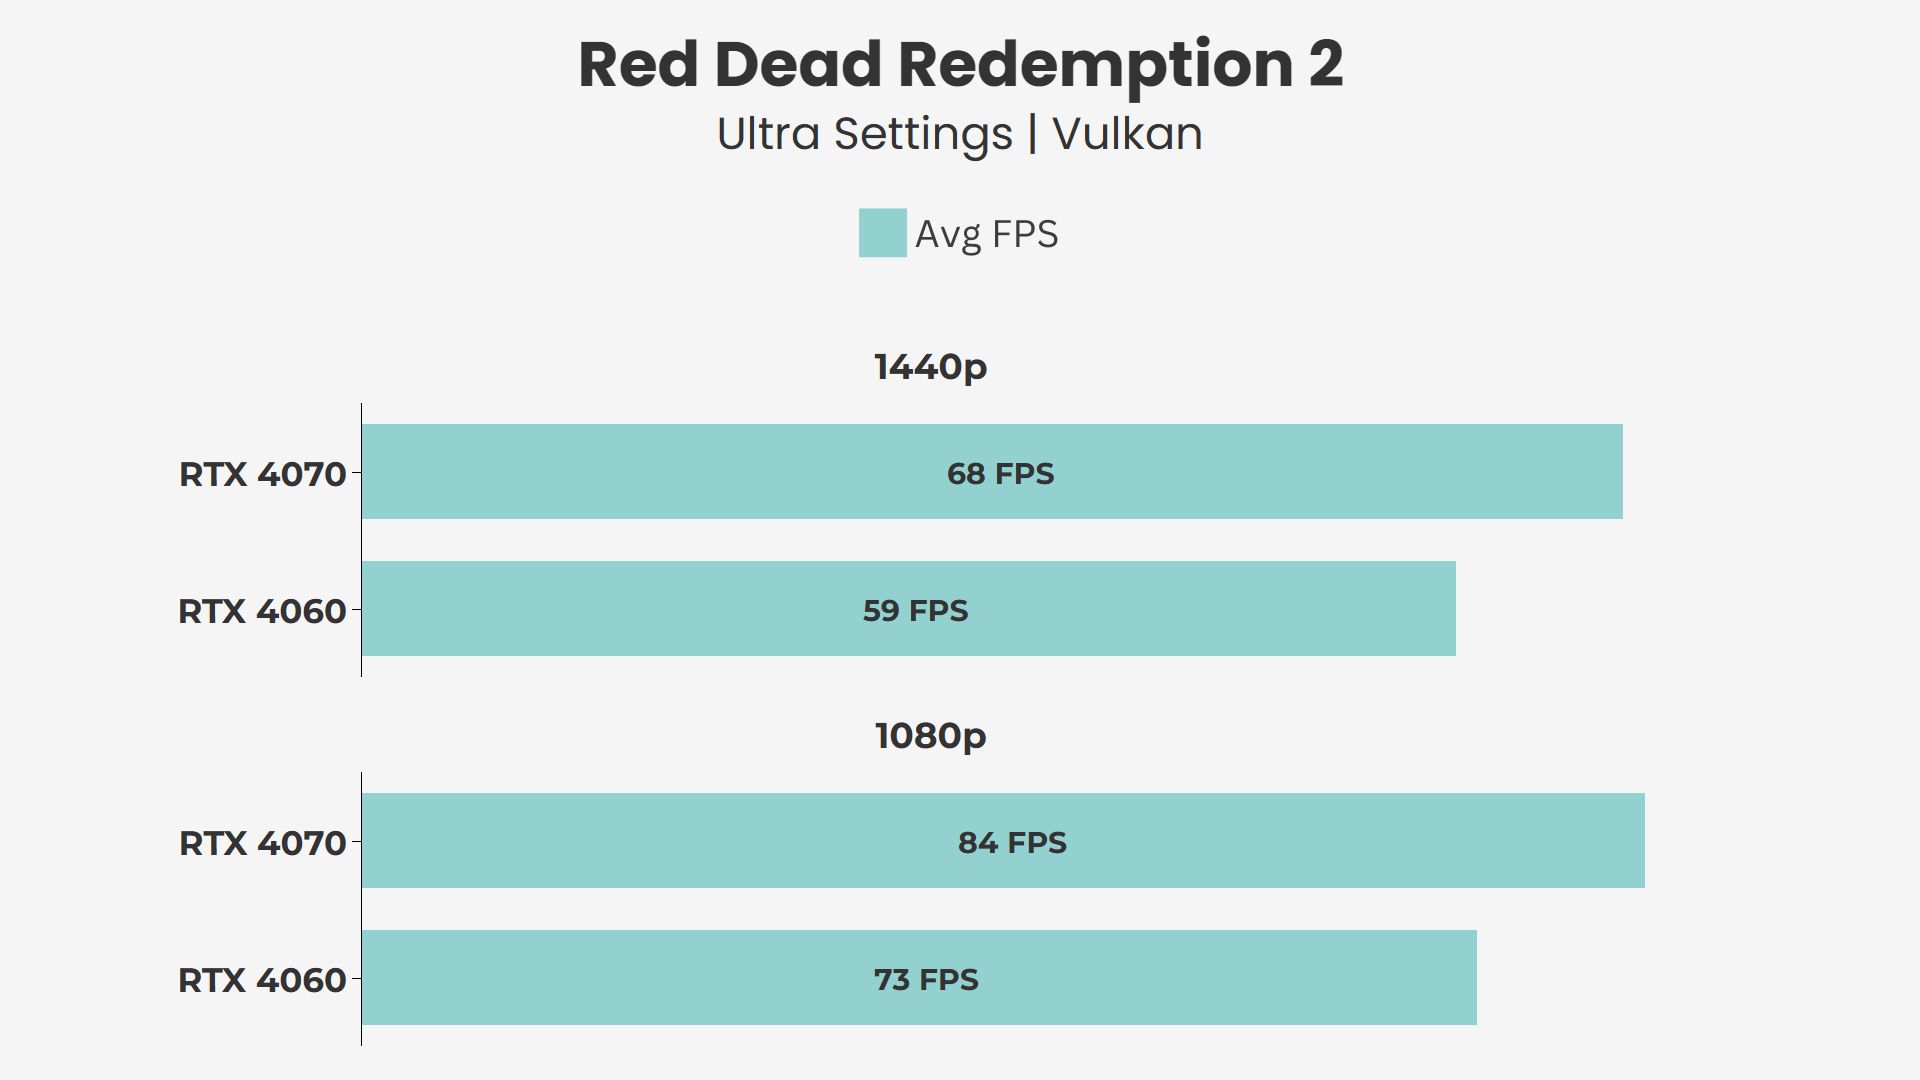 RTX 4060 vs RTX 4070 Red Dead Redemption 2